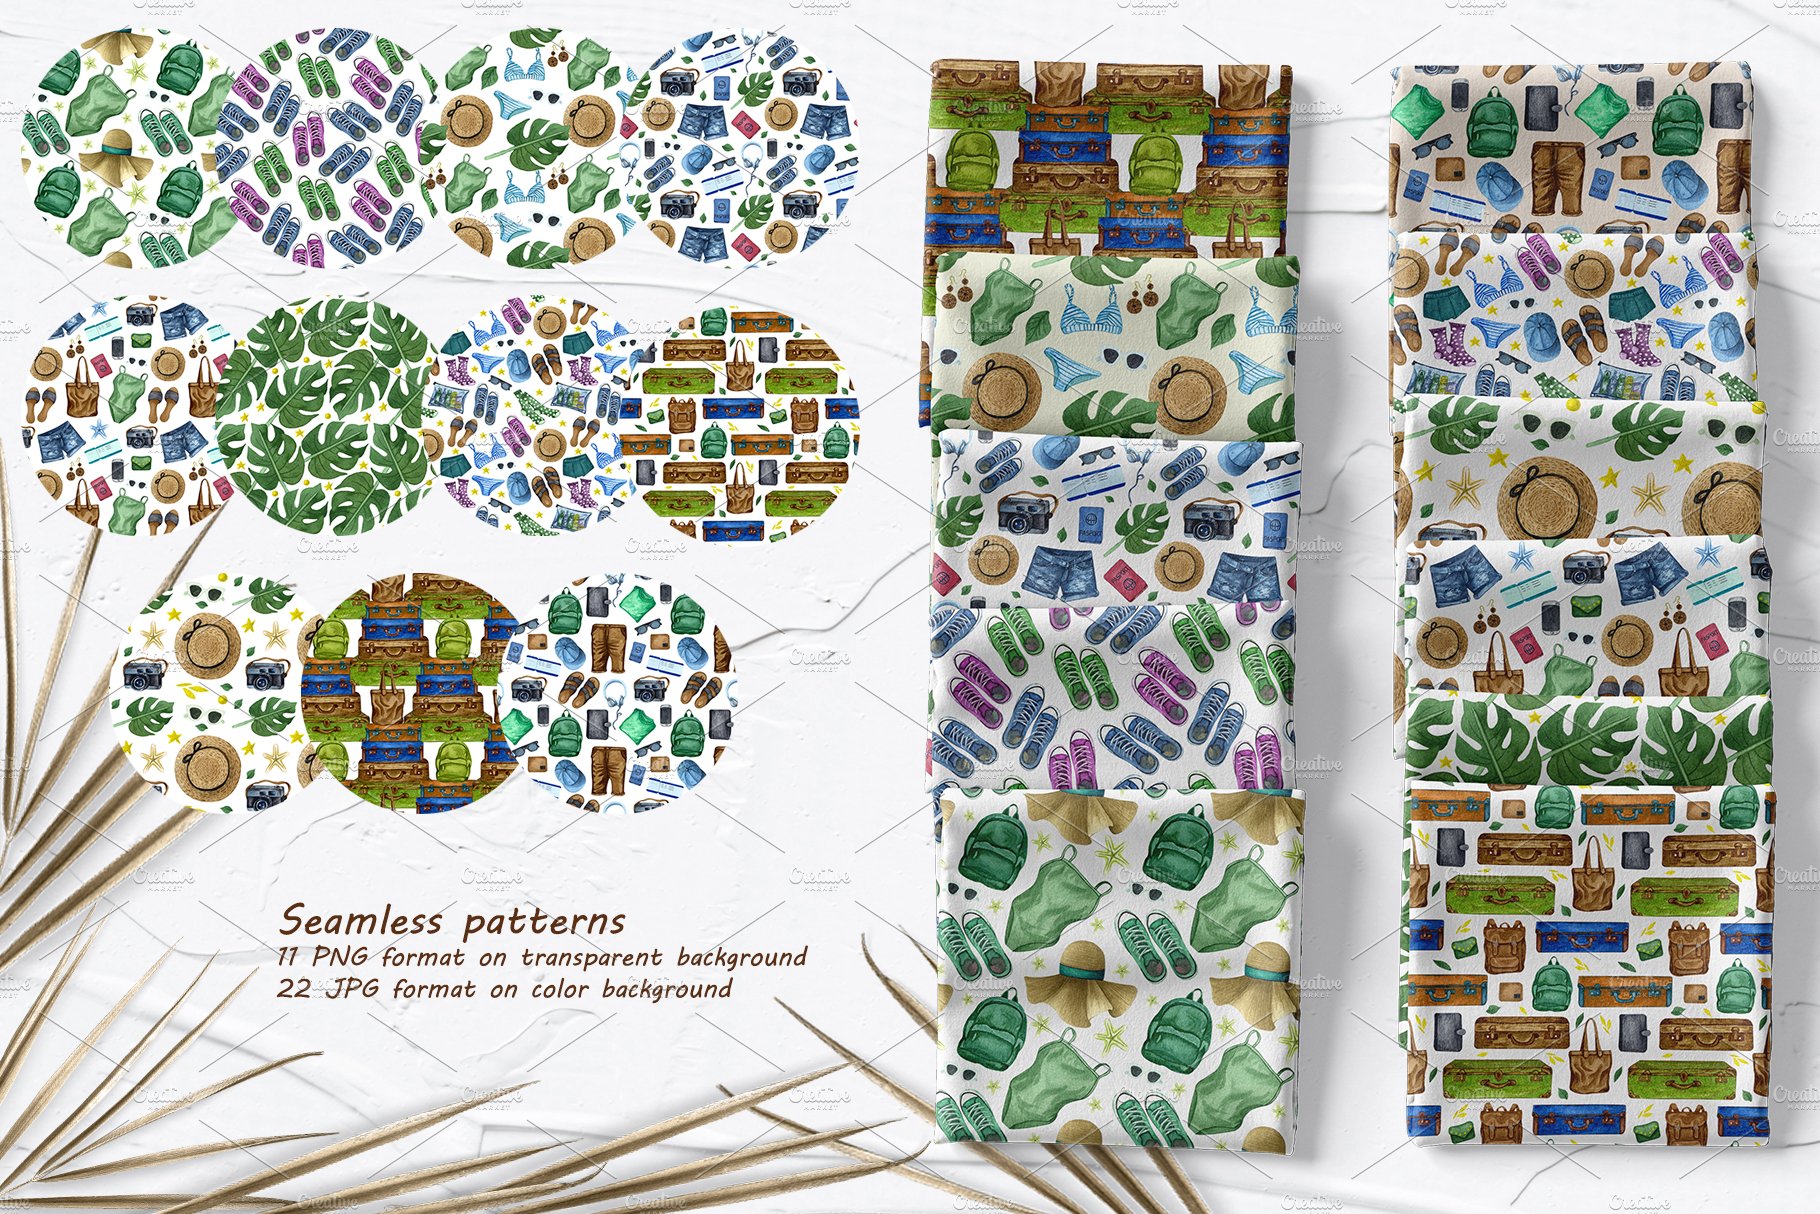 Nice travel pattern collection.